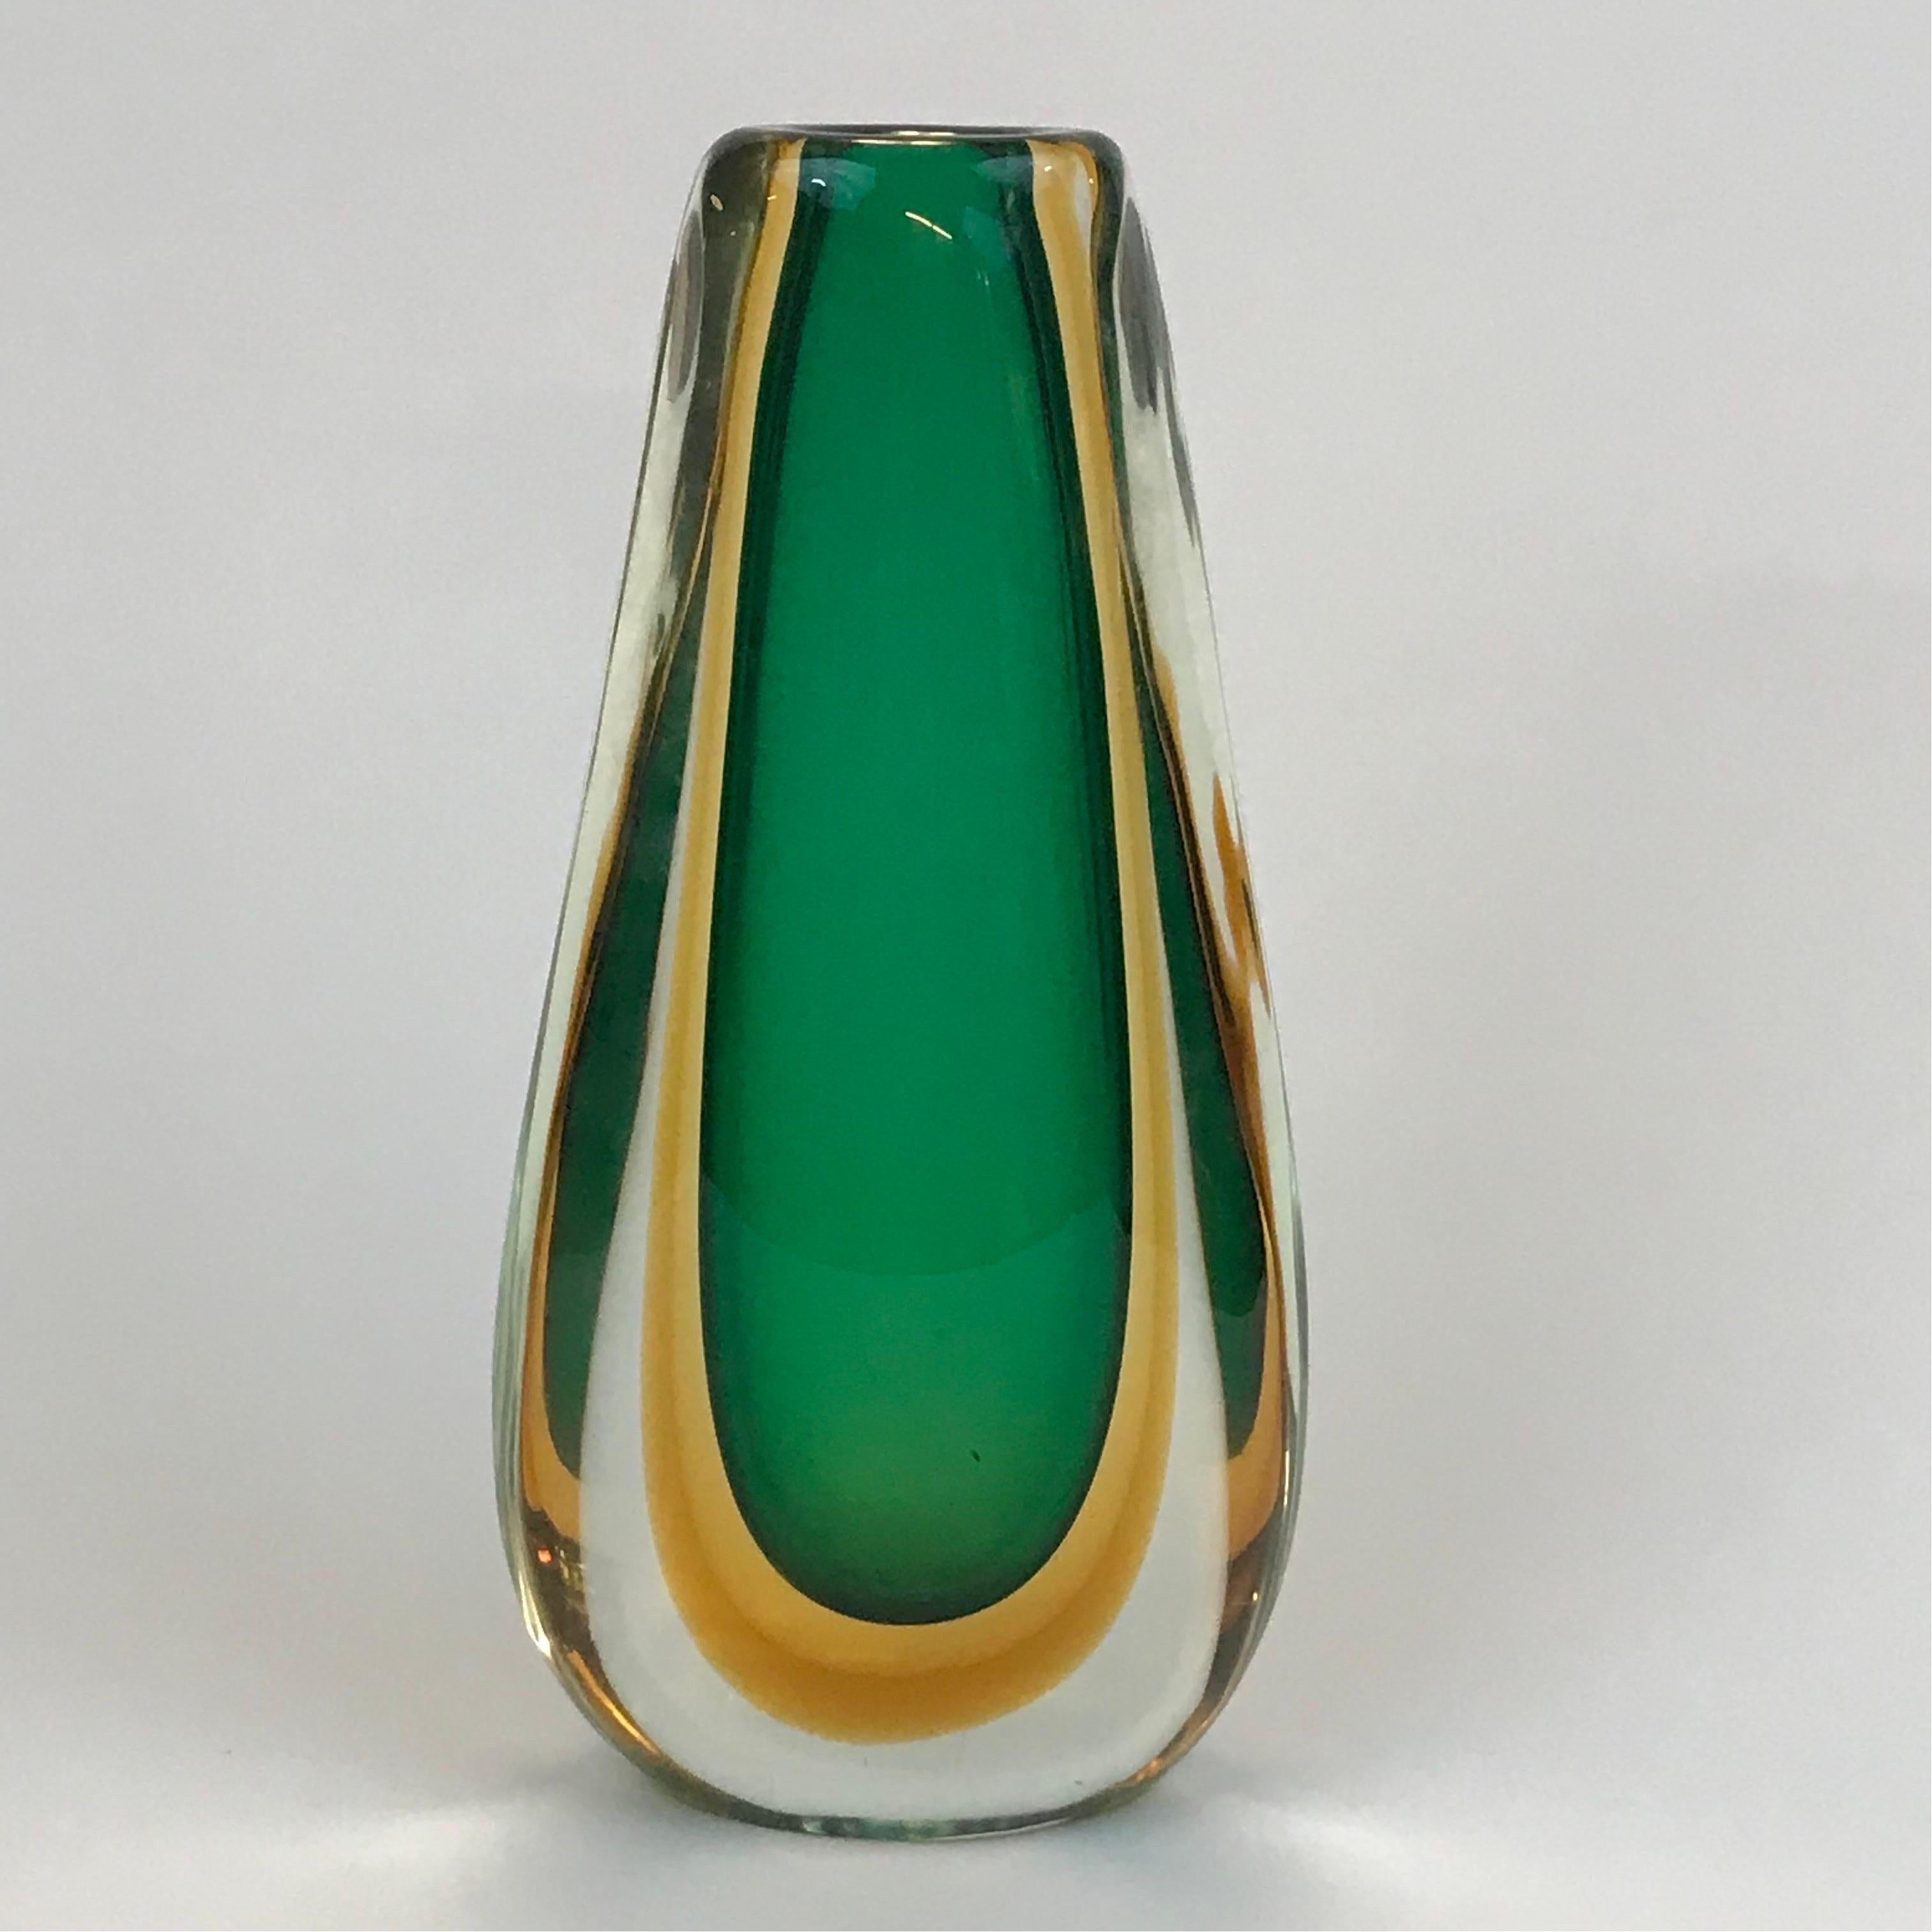 A large and heavy Sommerso technique vase by Flavio Poli for Seguso in clear amber and green glass. In overall excellent condition without chips cracks abrasions to the base, defects or sick glass. Shows one scratch at the base as shown in the